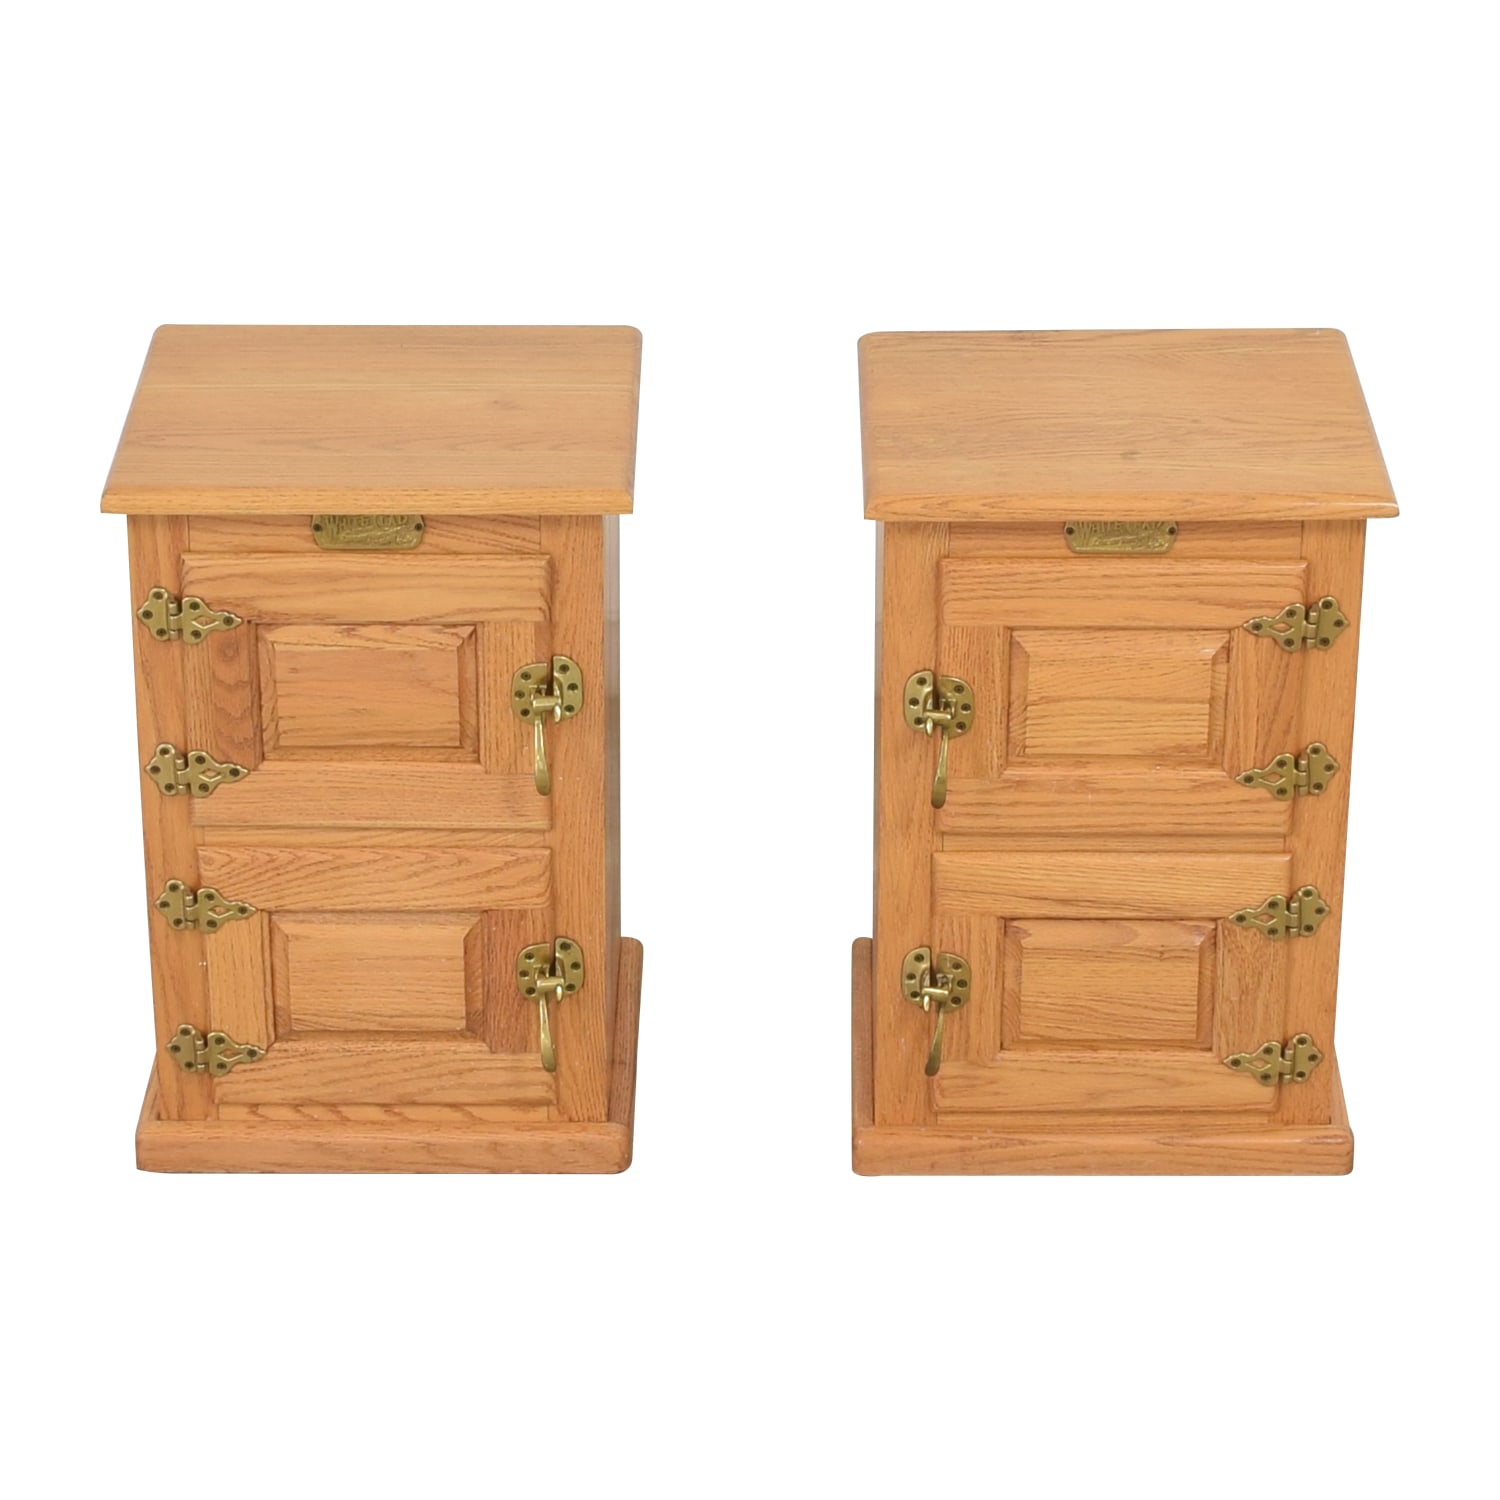 shop Lawless Hardware Lawless Hardware White Clad Ice Box End Tables online